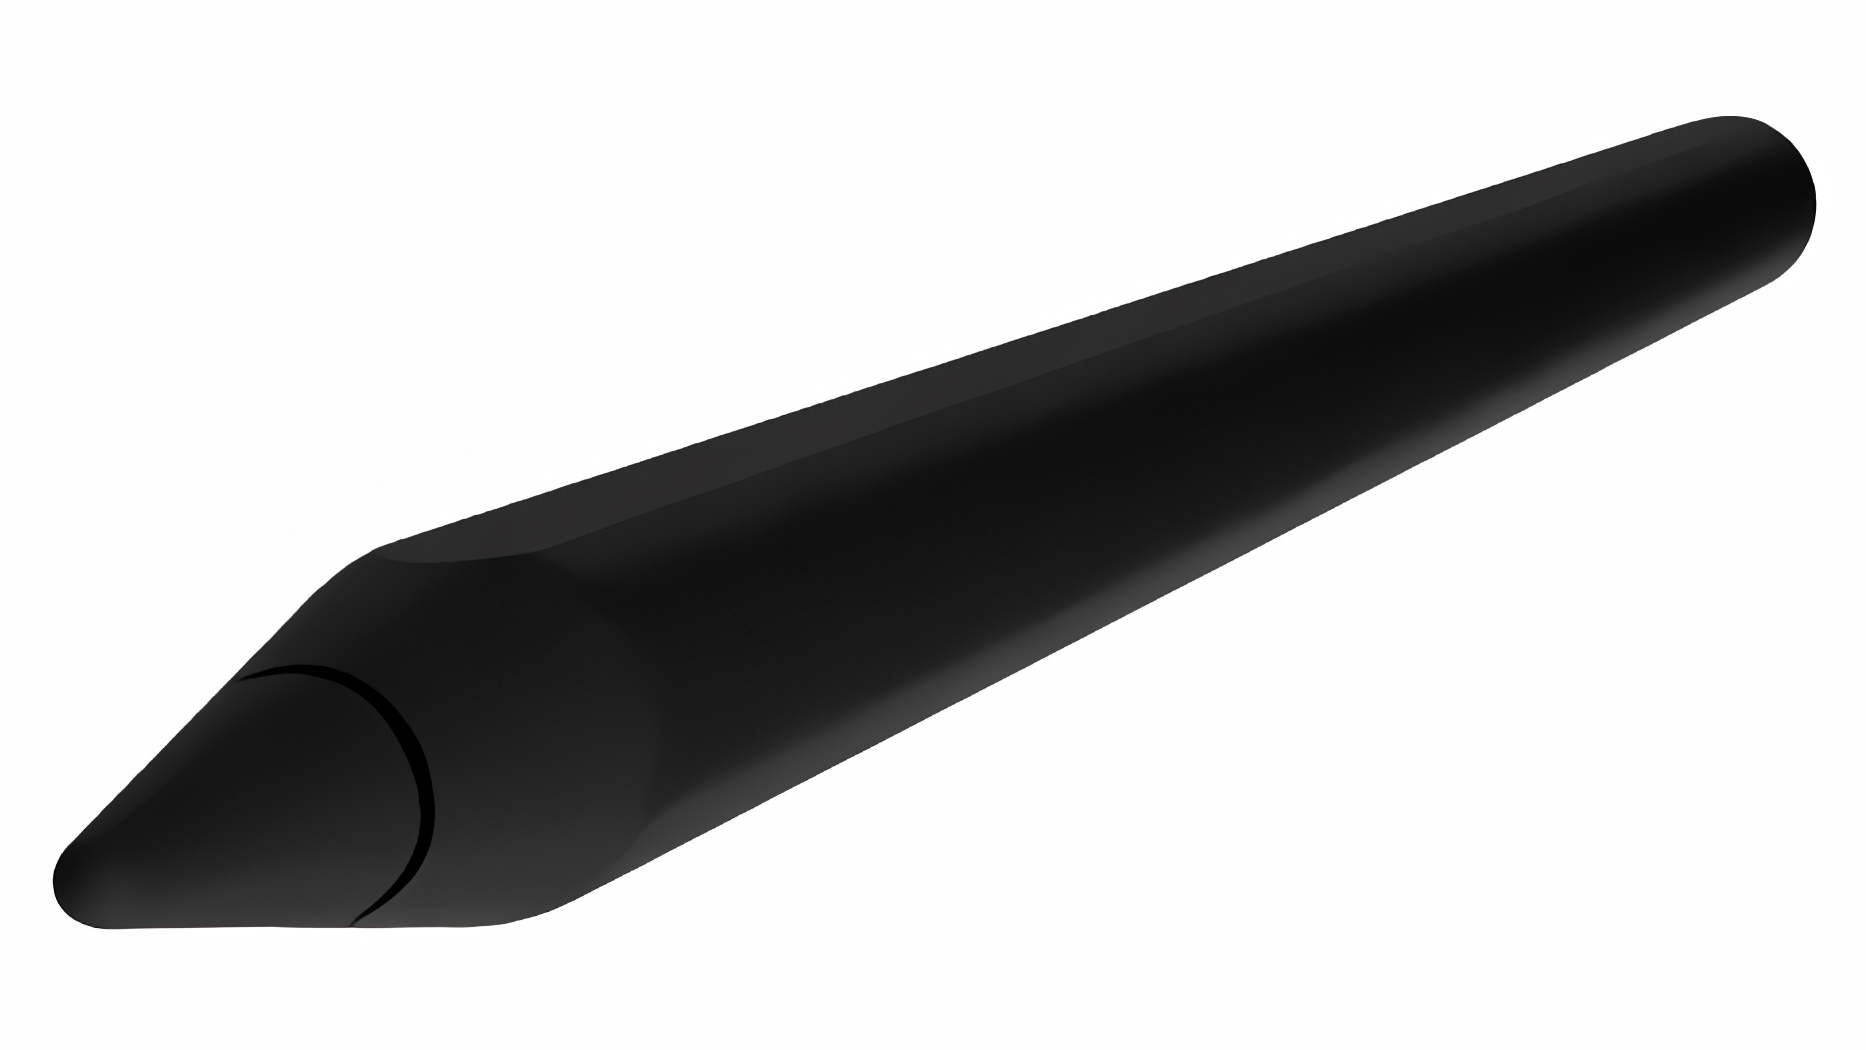 Next Apple Pencil Could Be Released in Black